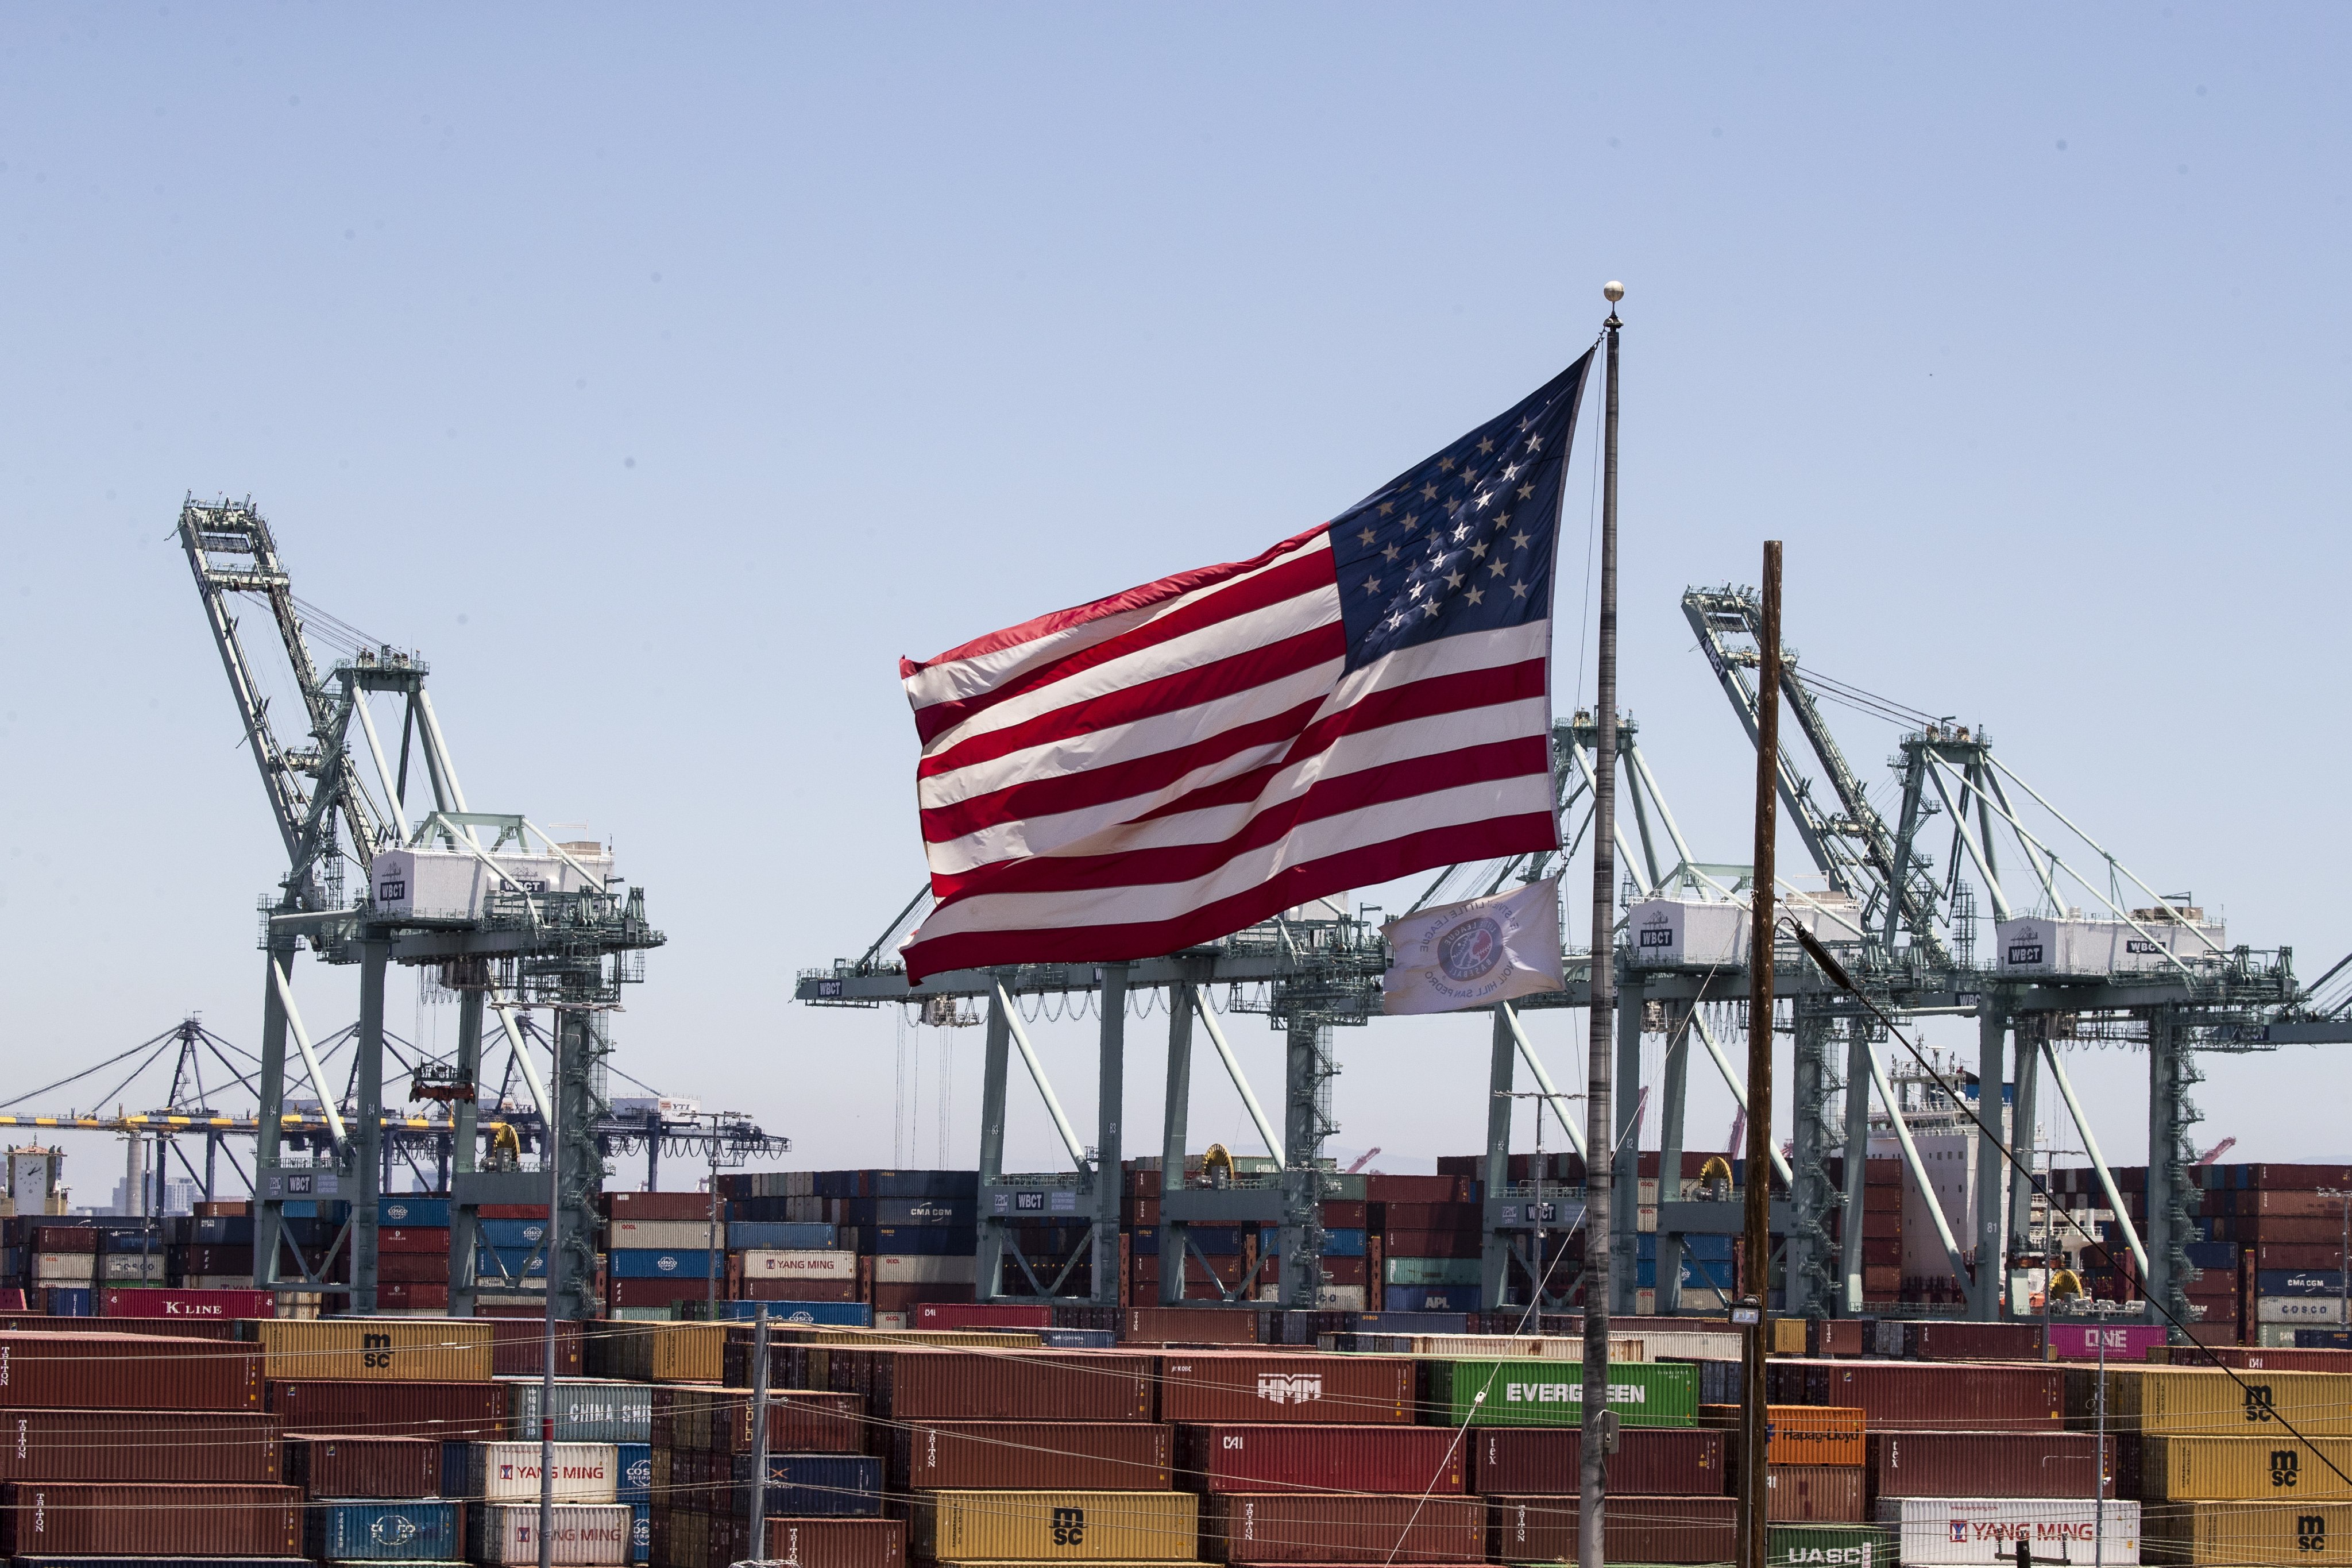 A US flag flies above hundreds of containers at the Port of Los Angeles, California, on July 7, 2022. Photo: EPA-EFE